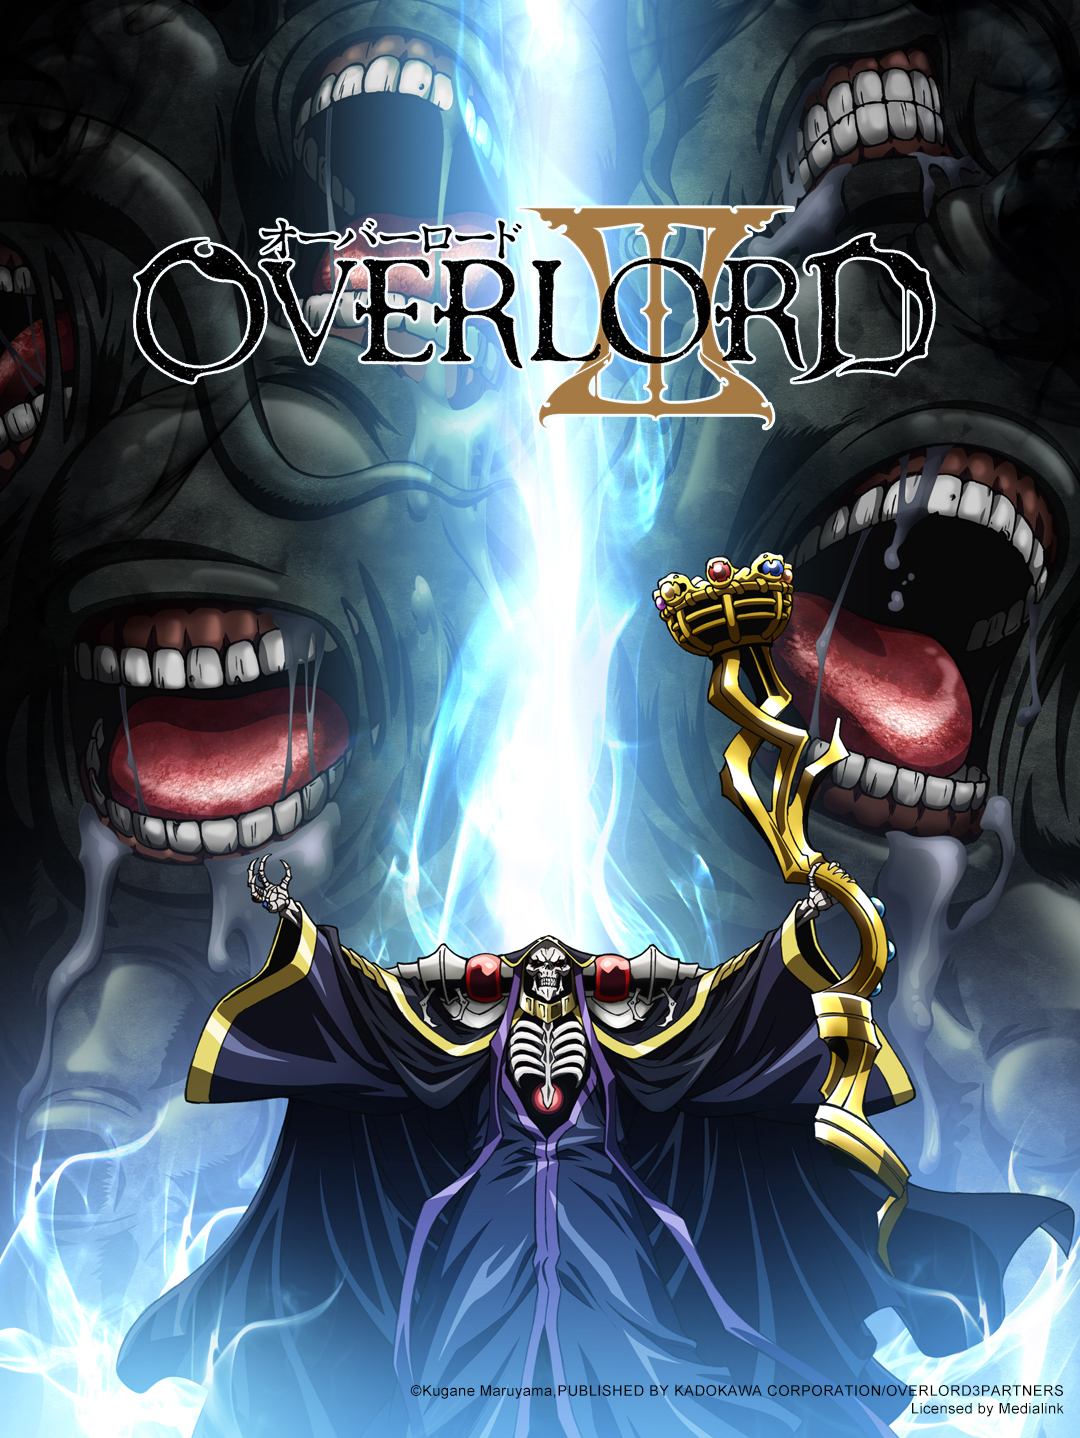 OVERLORD 第3季